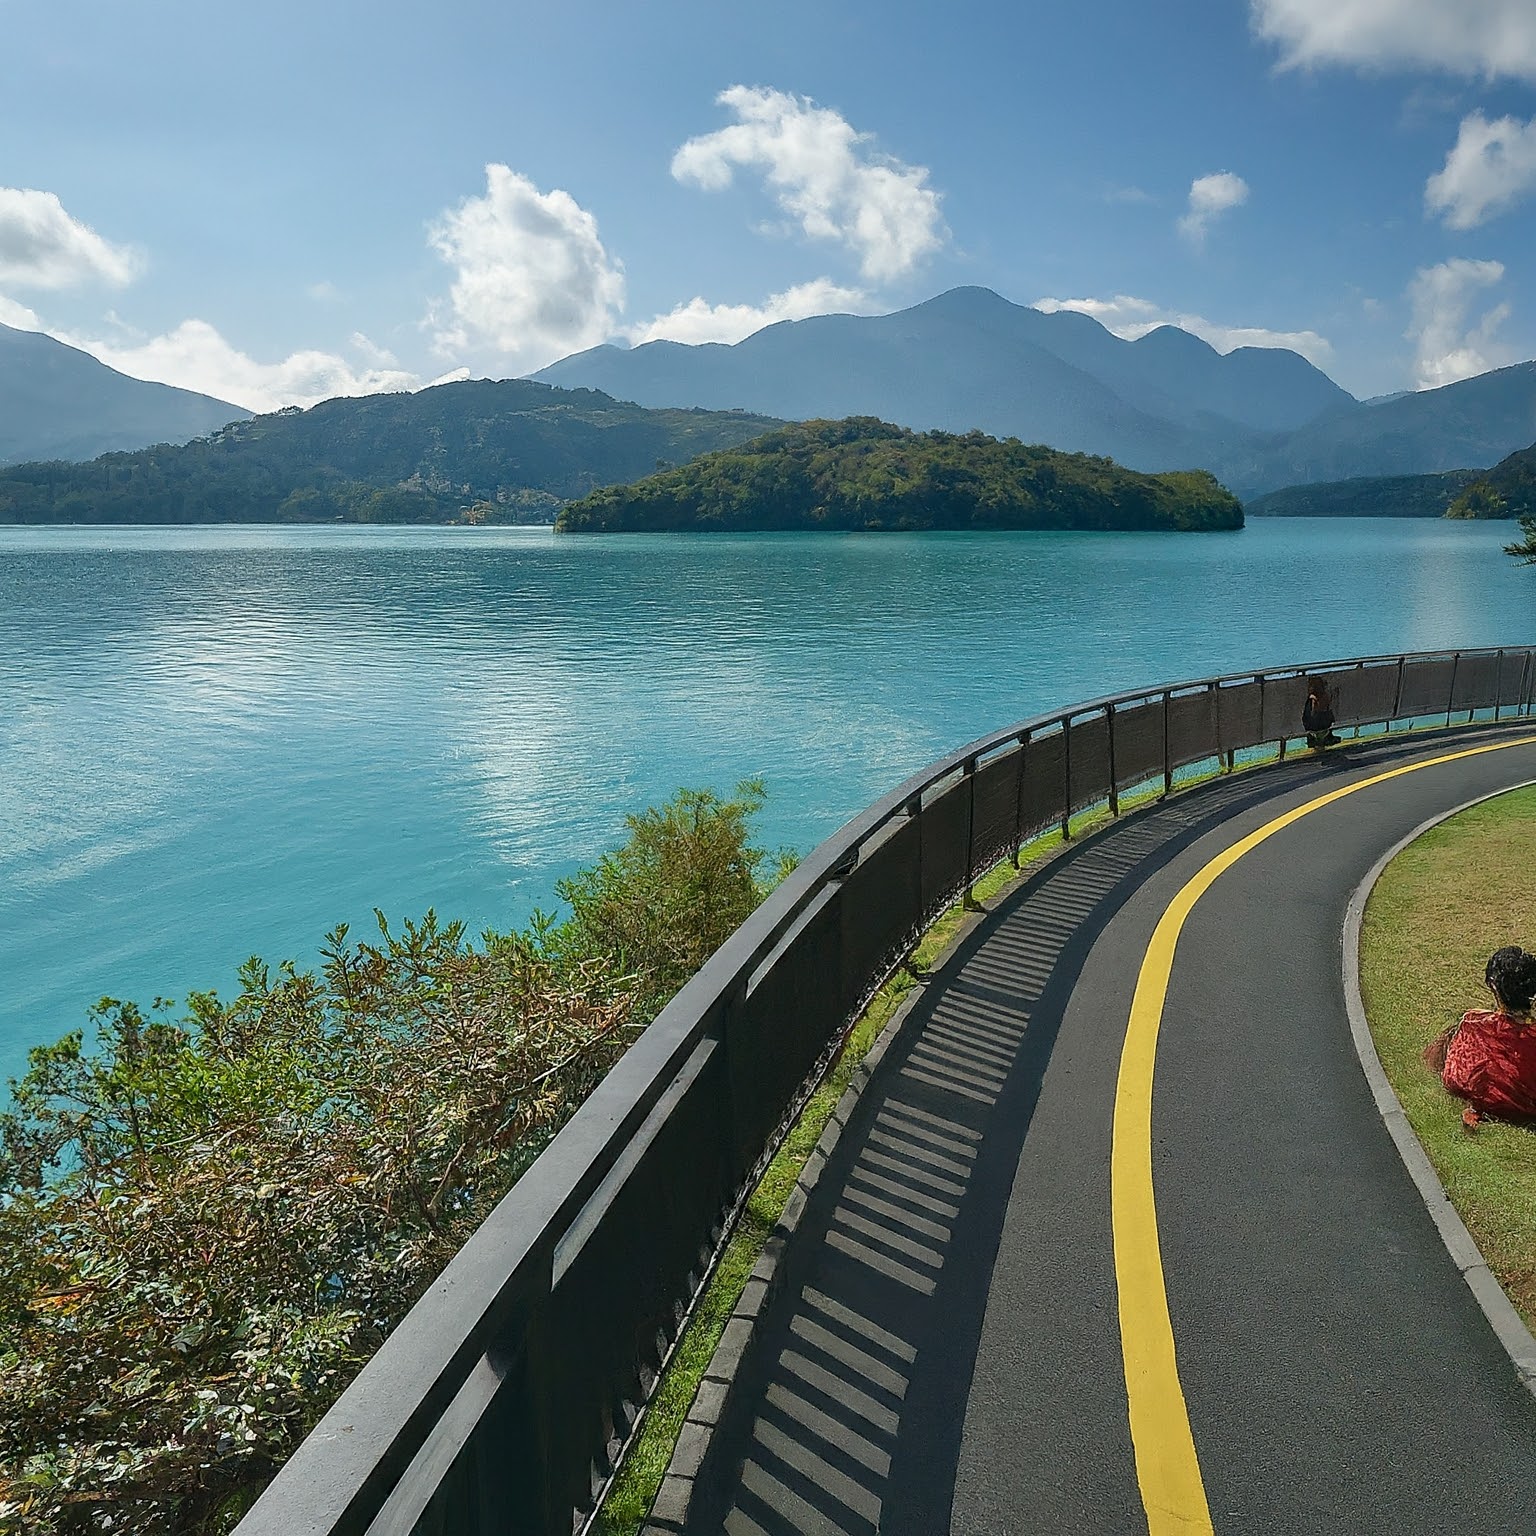 Bicycle path along the shore of Sun Moon Lake, Taiwan, with cyclists and mountain views.